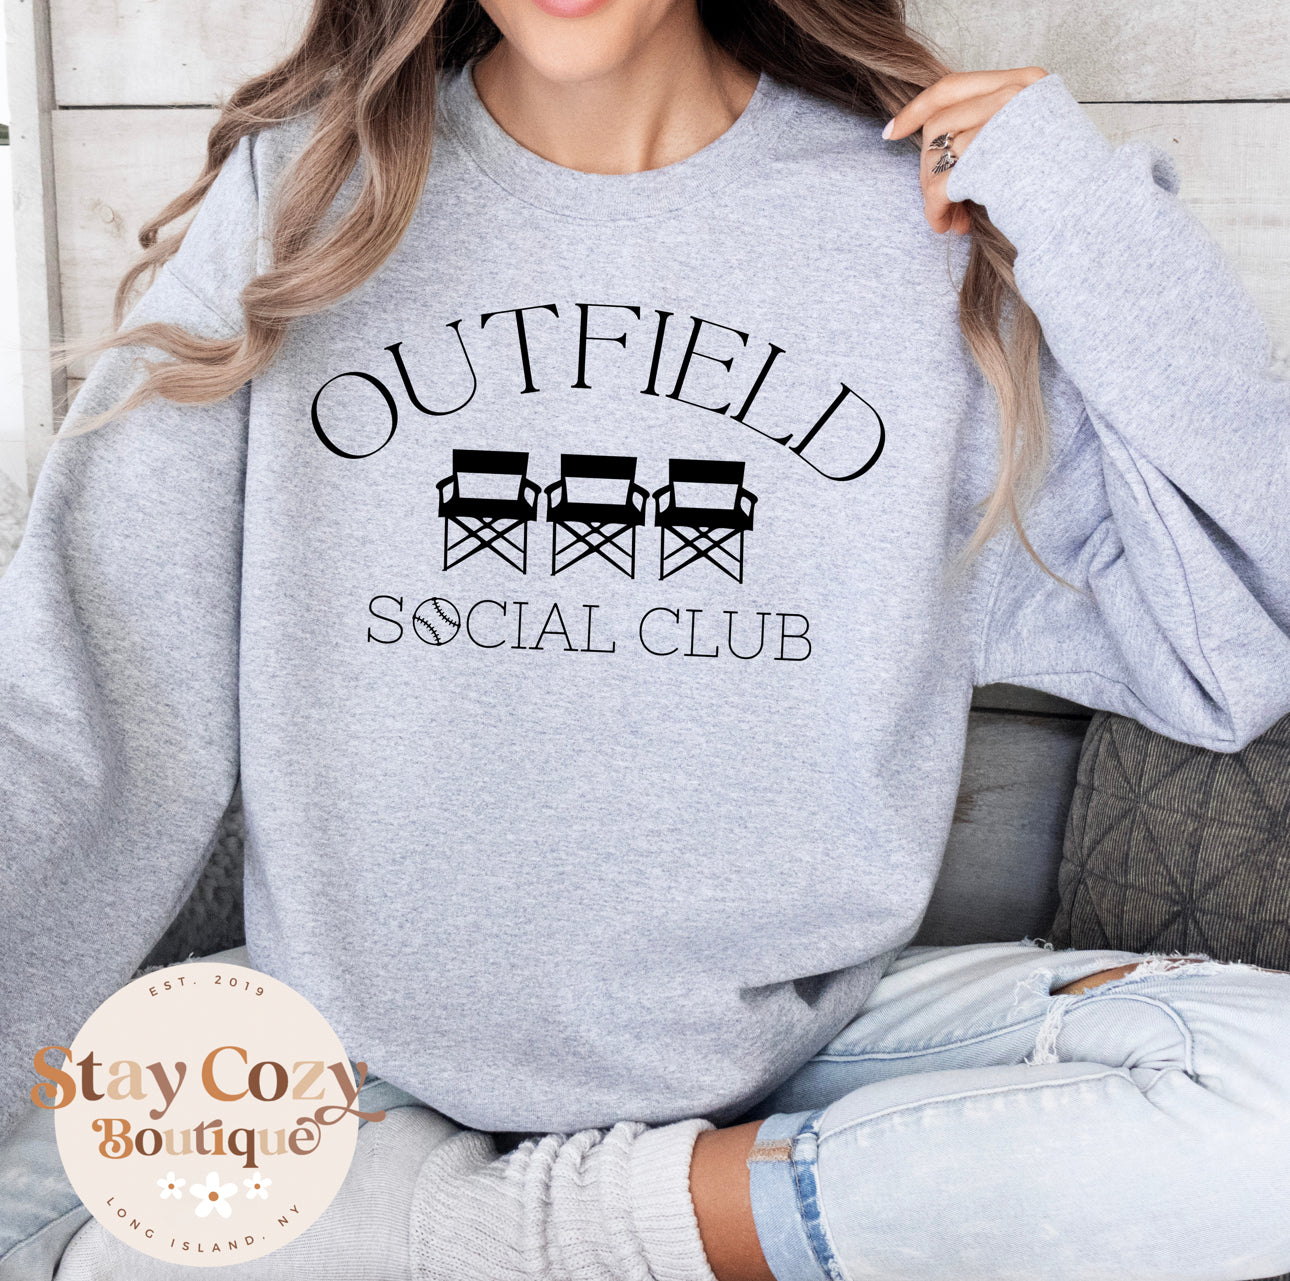 Outfield Social Club Weekends are for Baseball Sweatshirt, Baseball Mom Sweatshirt, Baseball Mom Crewneck, Weekends are for Baseball Sweatshirt